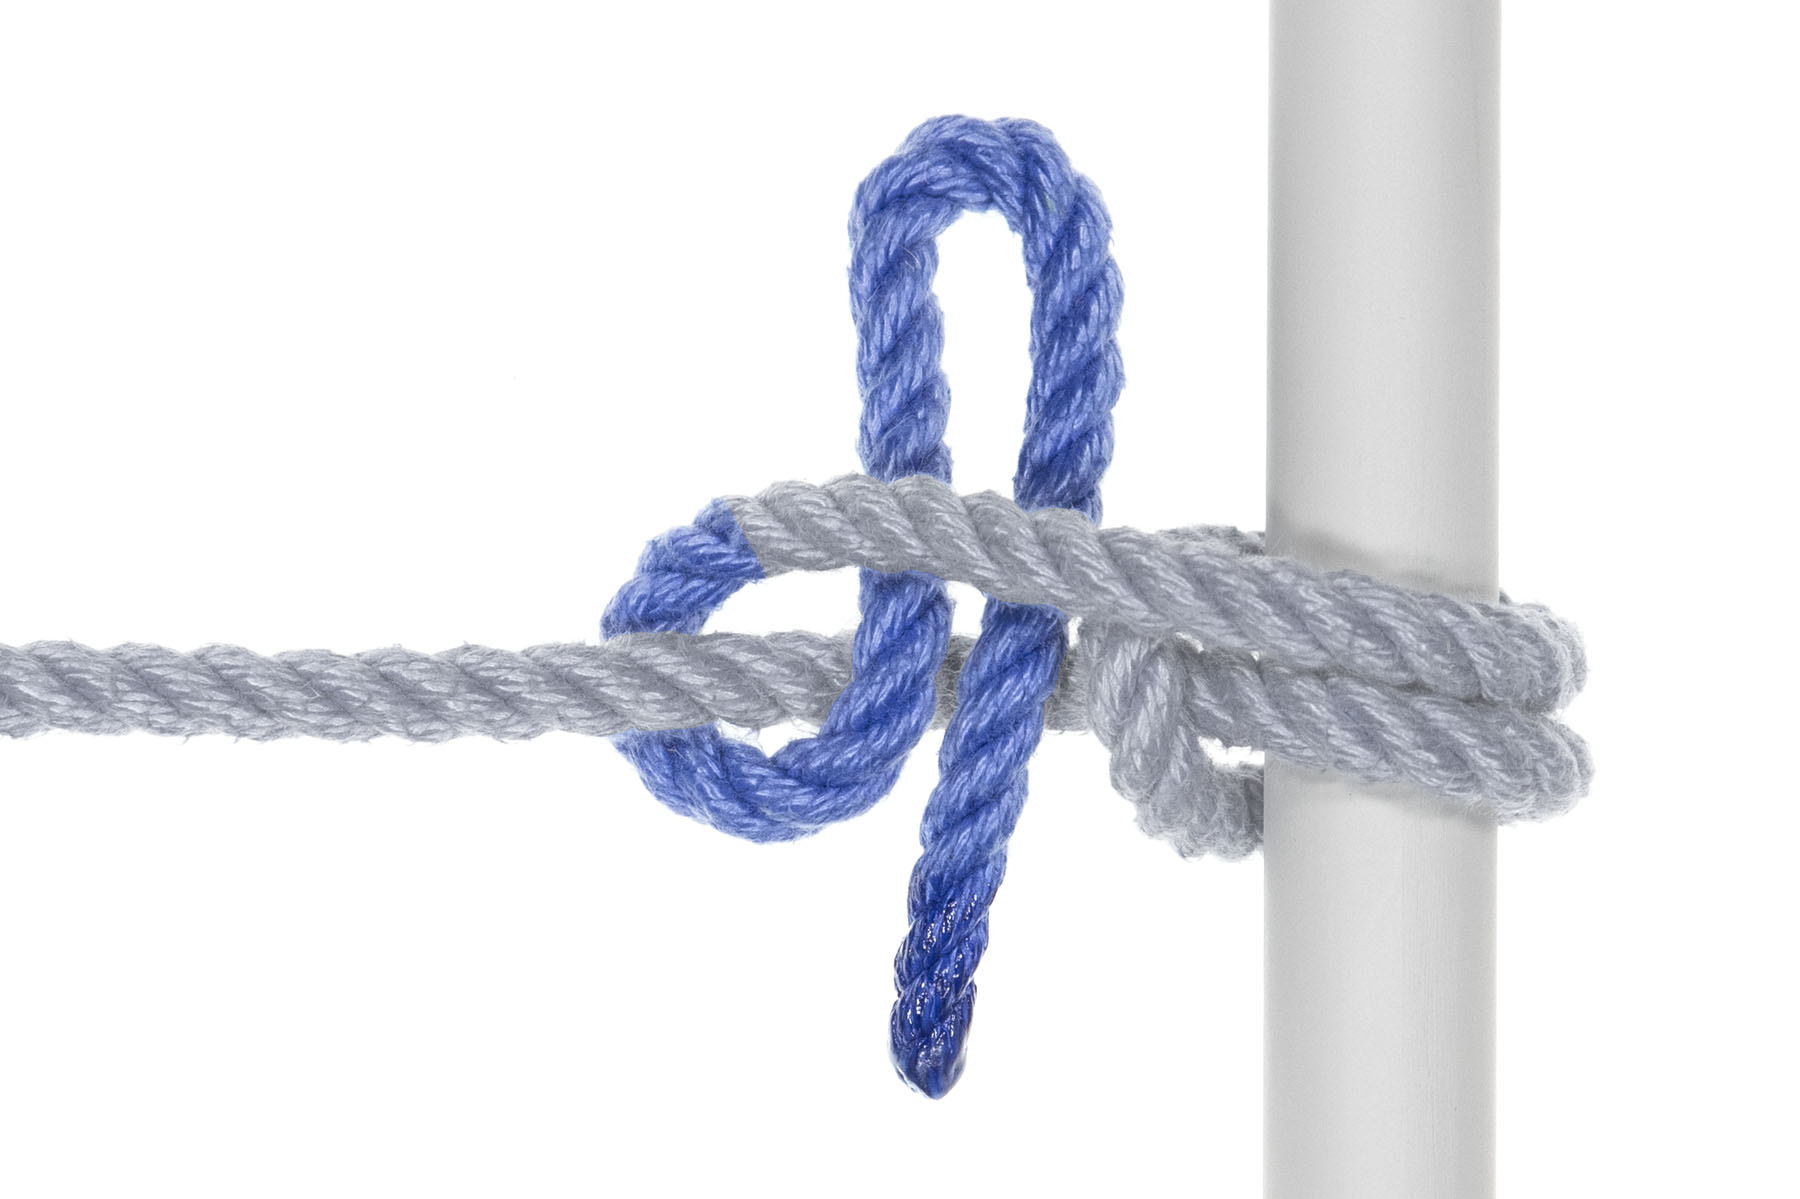 The Munter hitch is finished with a slipped half hitch. The working end goes under the standing part. It is then folded into a bight and the bight goes over the standing part and under the single part of the working end.